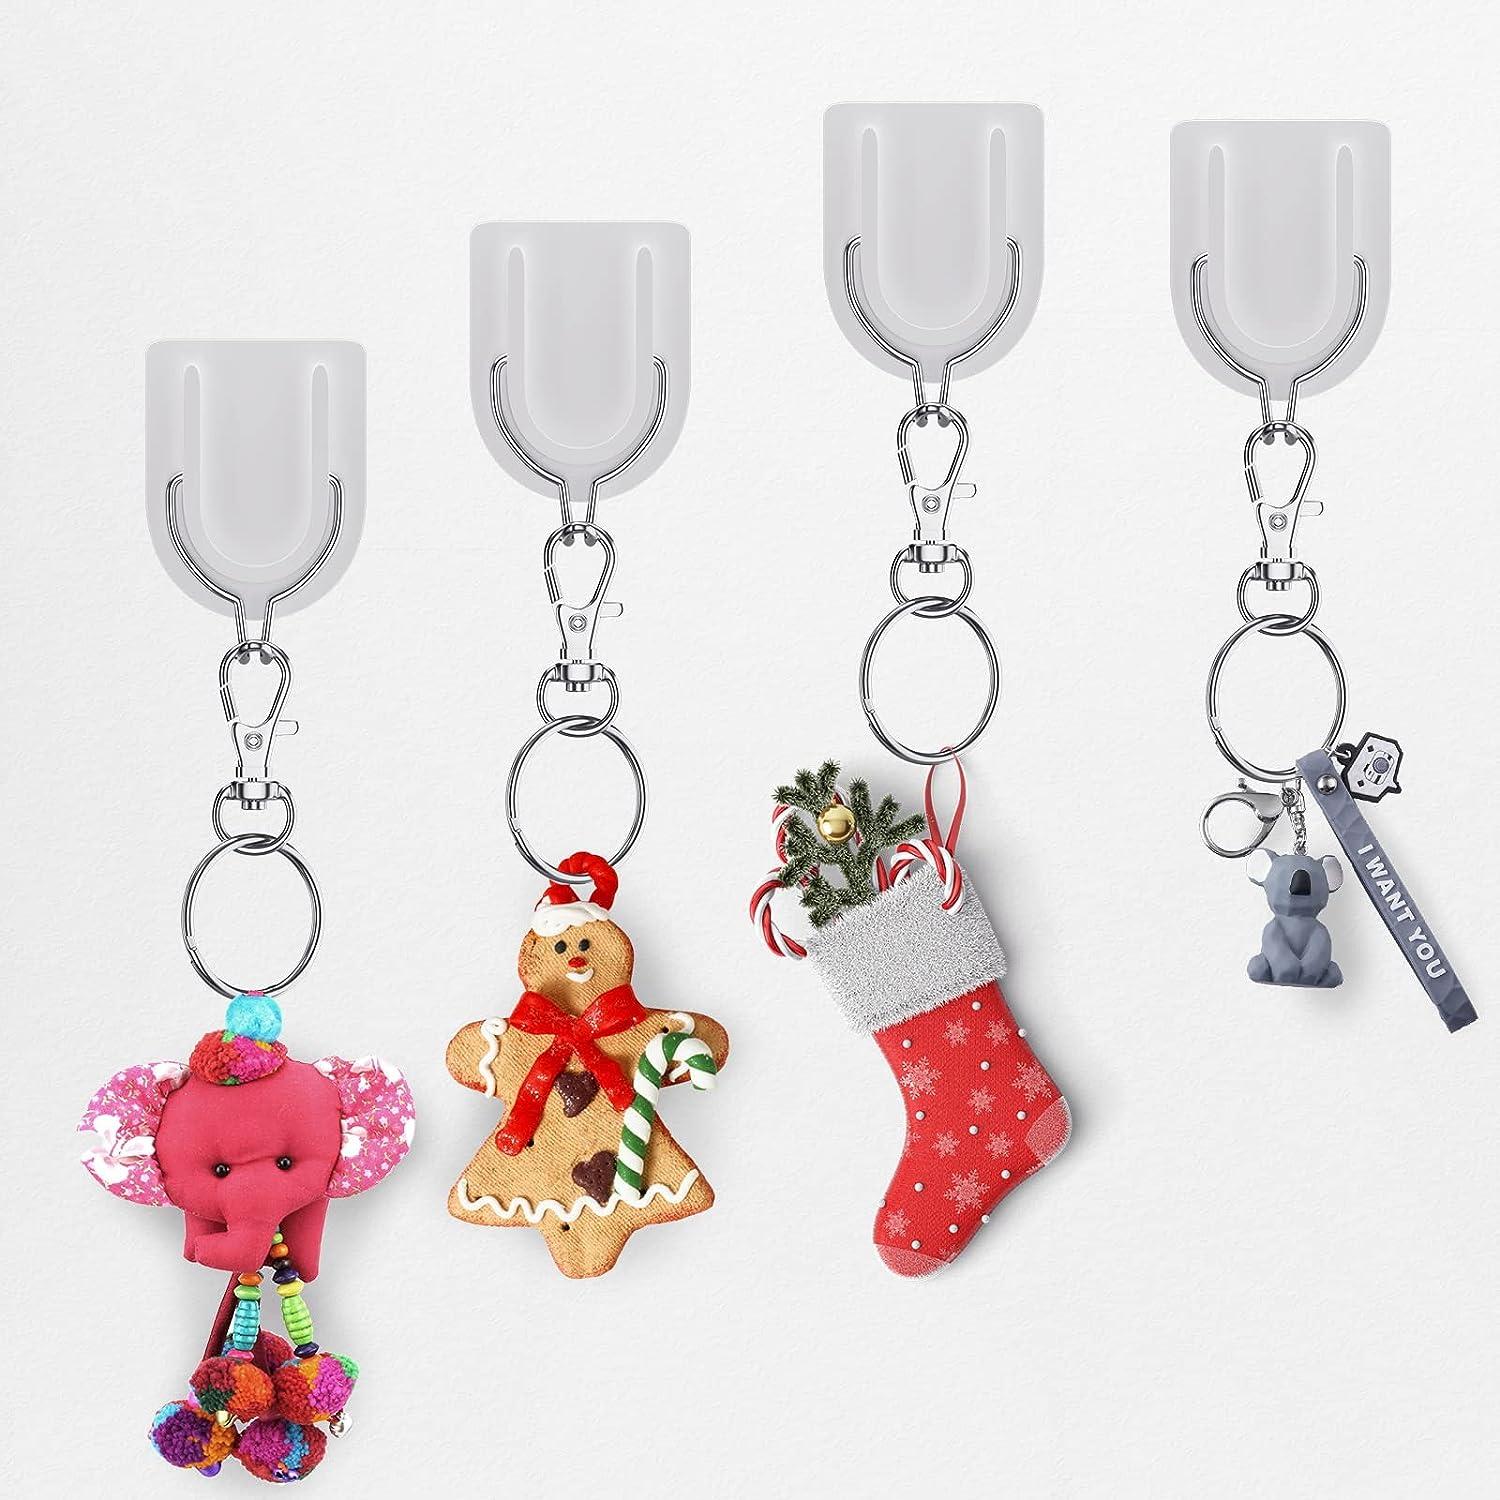 110pcs Key Chain Rings Set For Diy Crafts Including Lobster Clasps